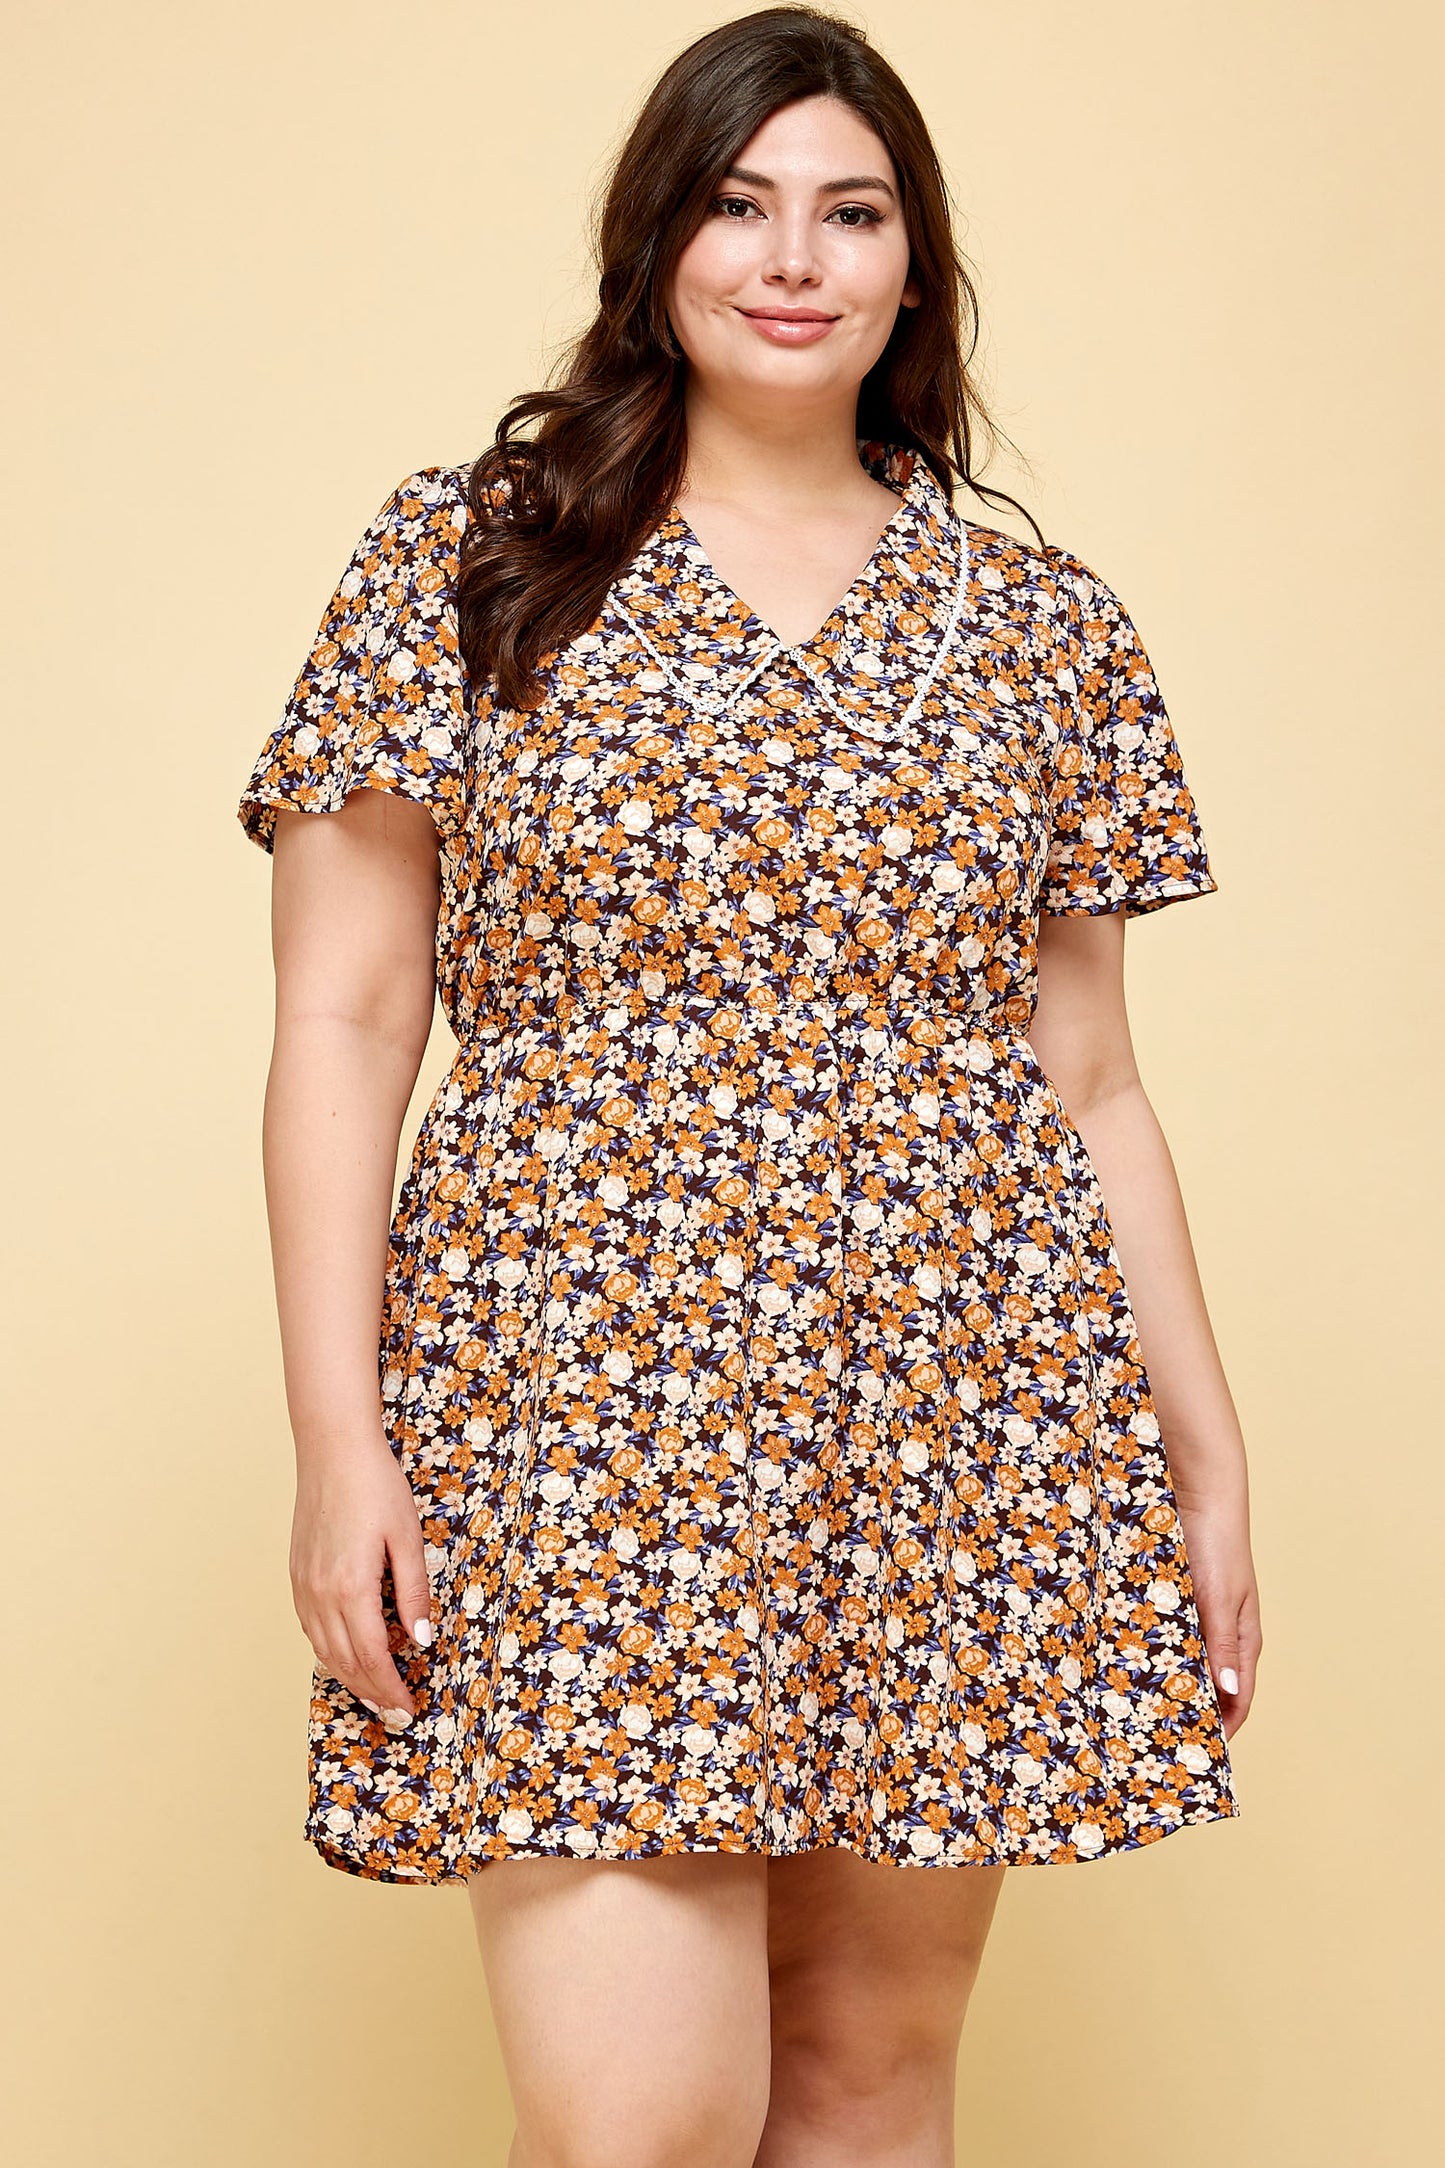 PLUS SIZE COLLARED FLORAL DRESS